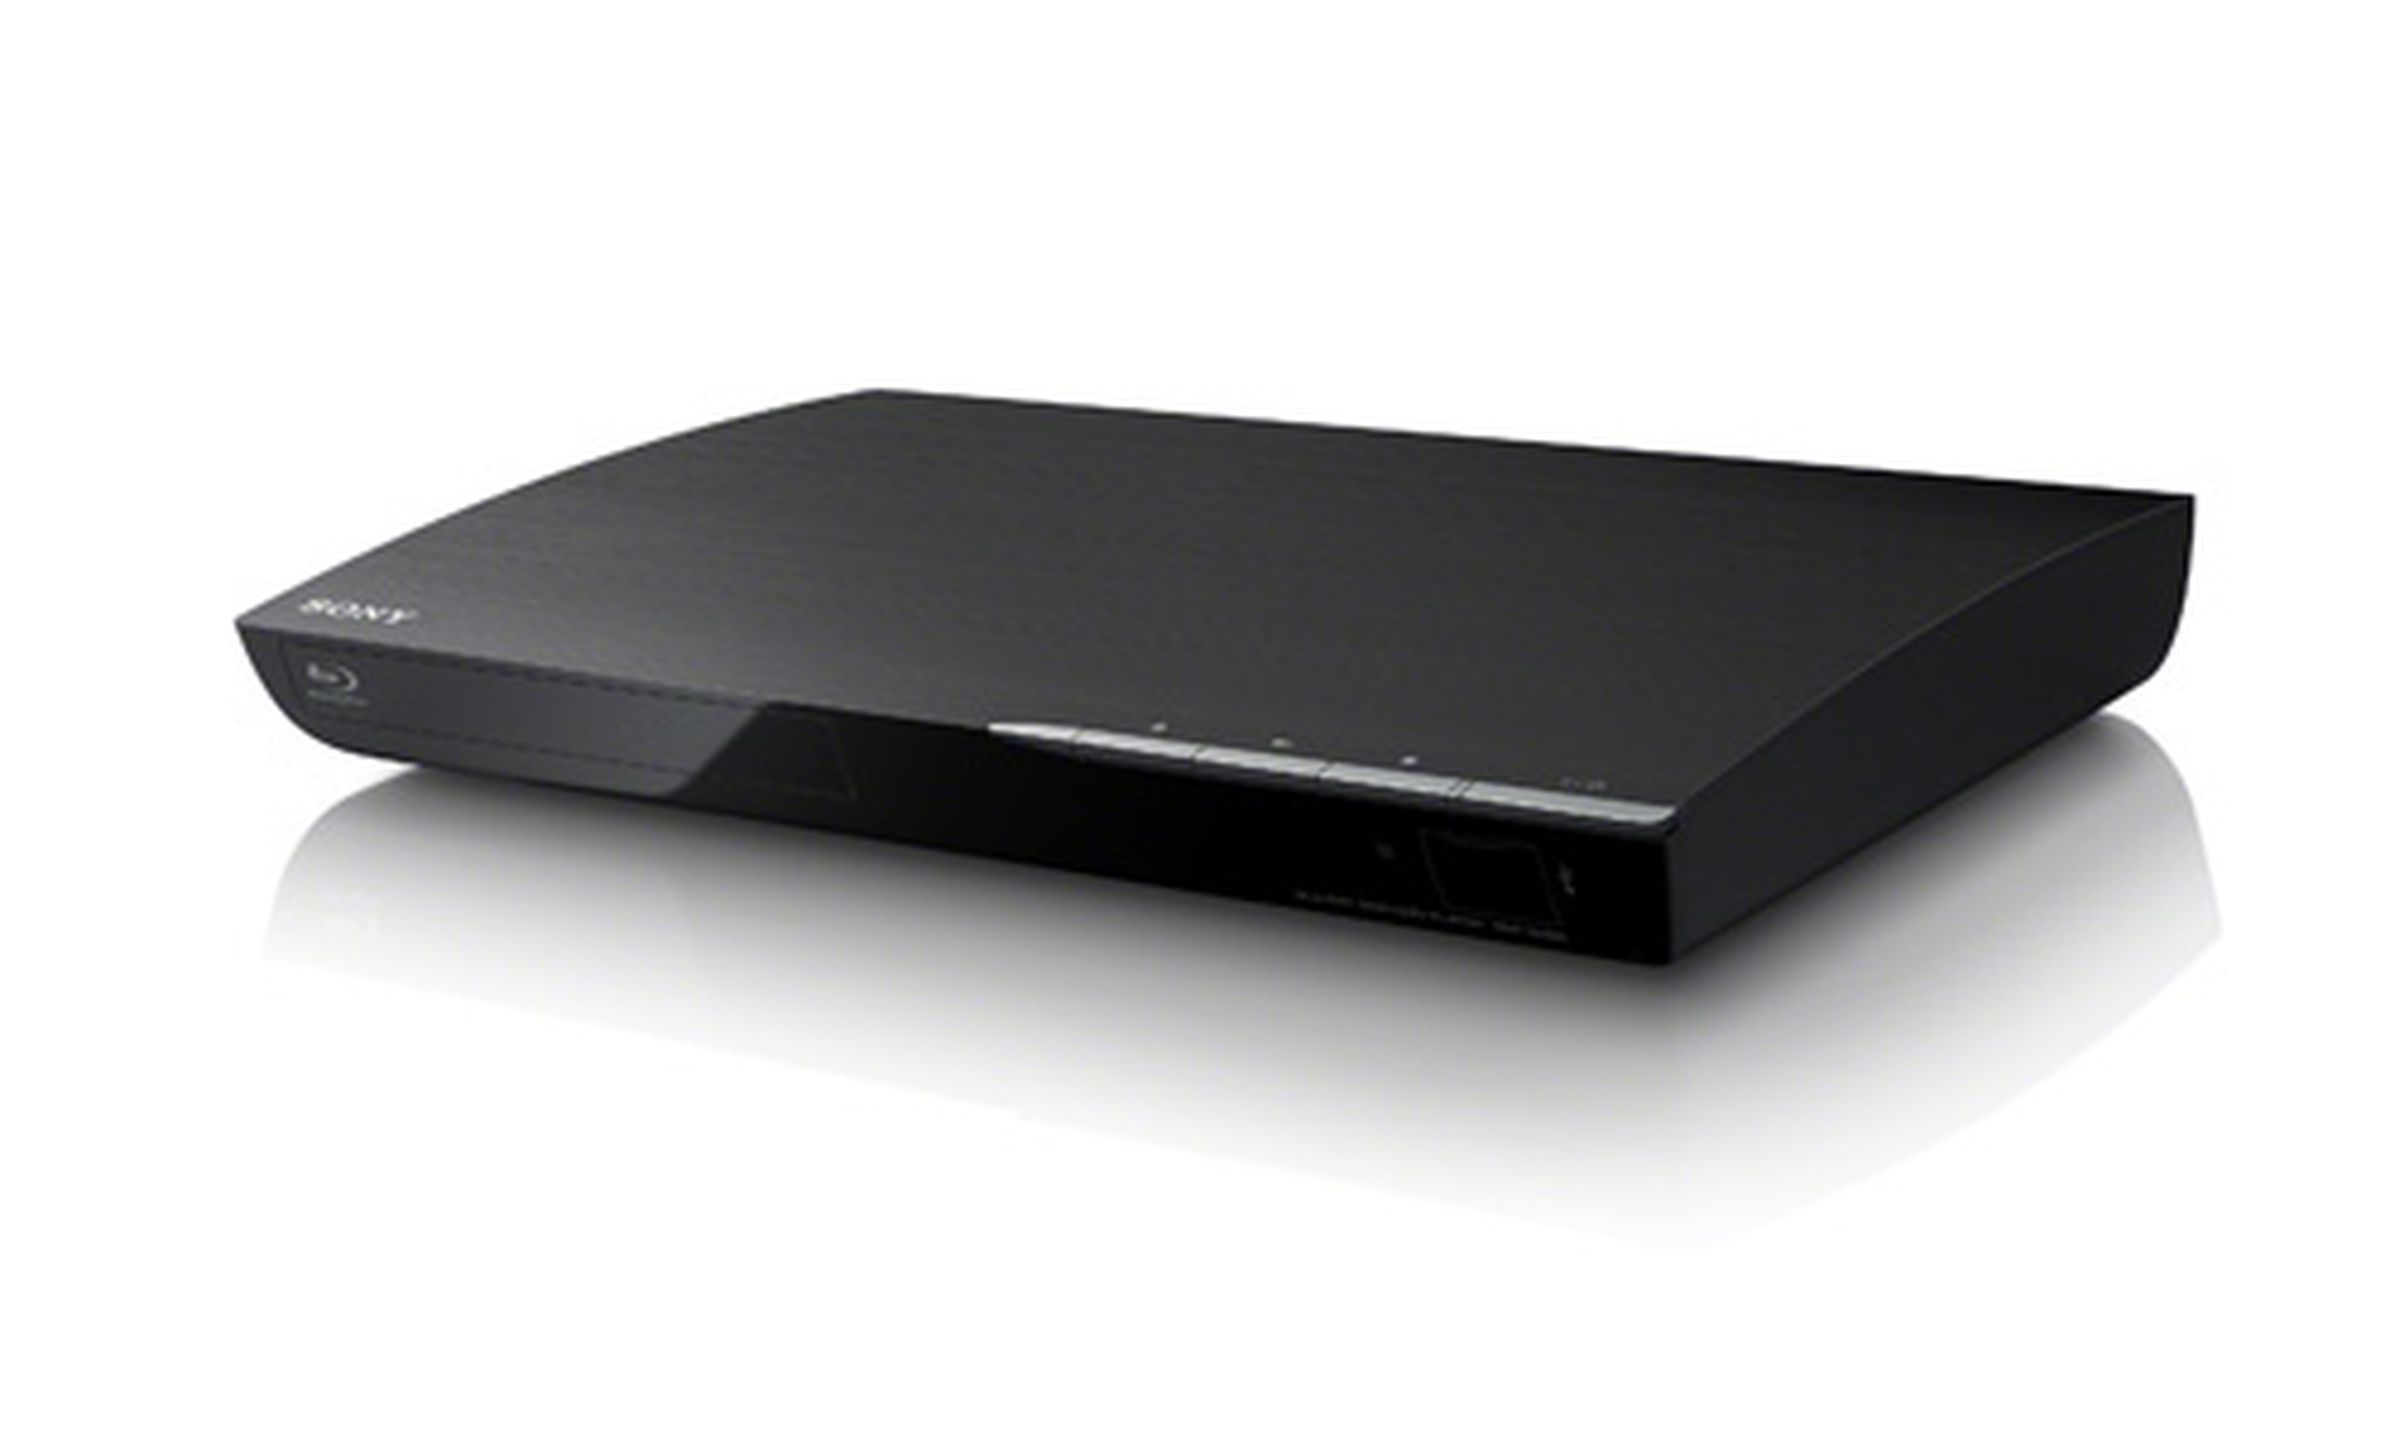 Sony smart Blu-ray players at CES 2012